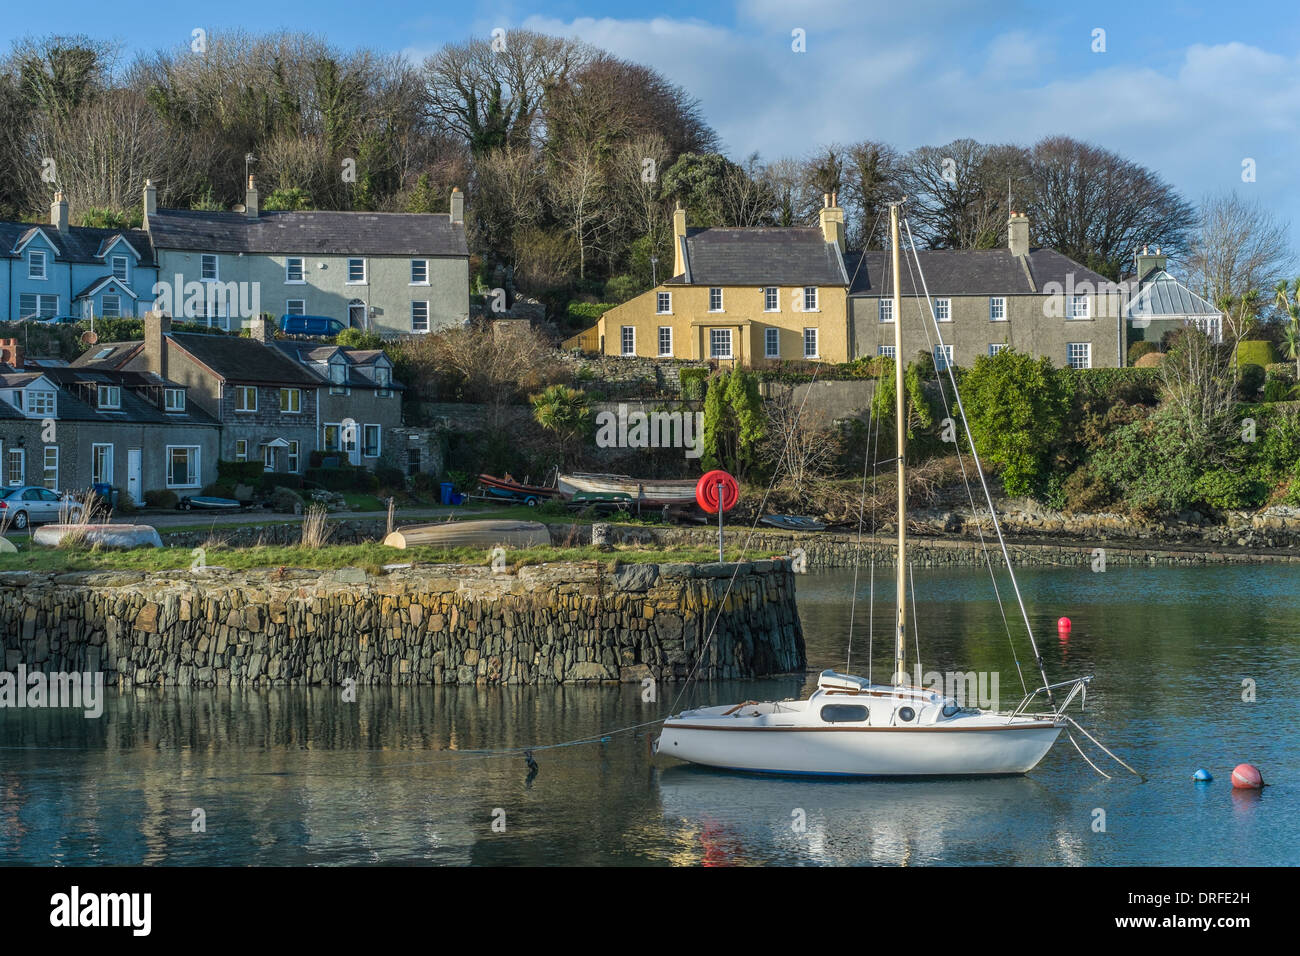 Postcard view of Strangford town, Co Down, taken from the quayside overlooking a moored yacht in a sheltered bay. Stock Photo